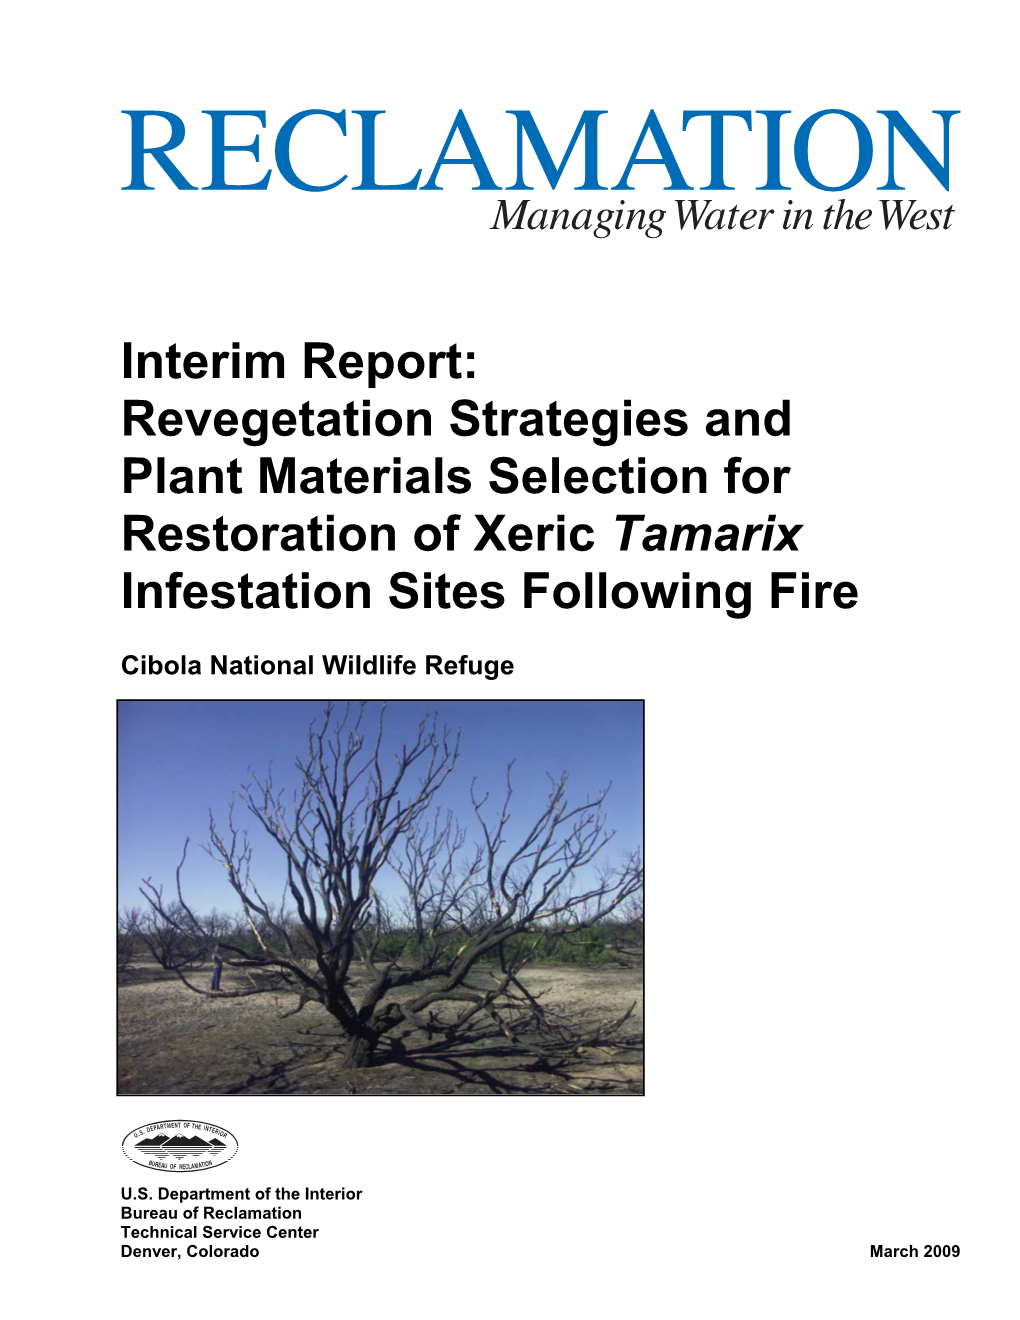 Interim Report: Revegetation Strategies and Plant Materials Selection for Restoration of Xeric Tamarix Infestation Sites Following Fire